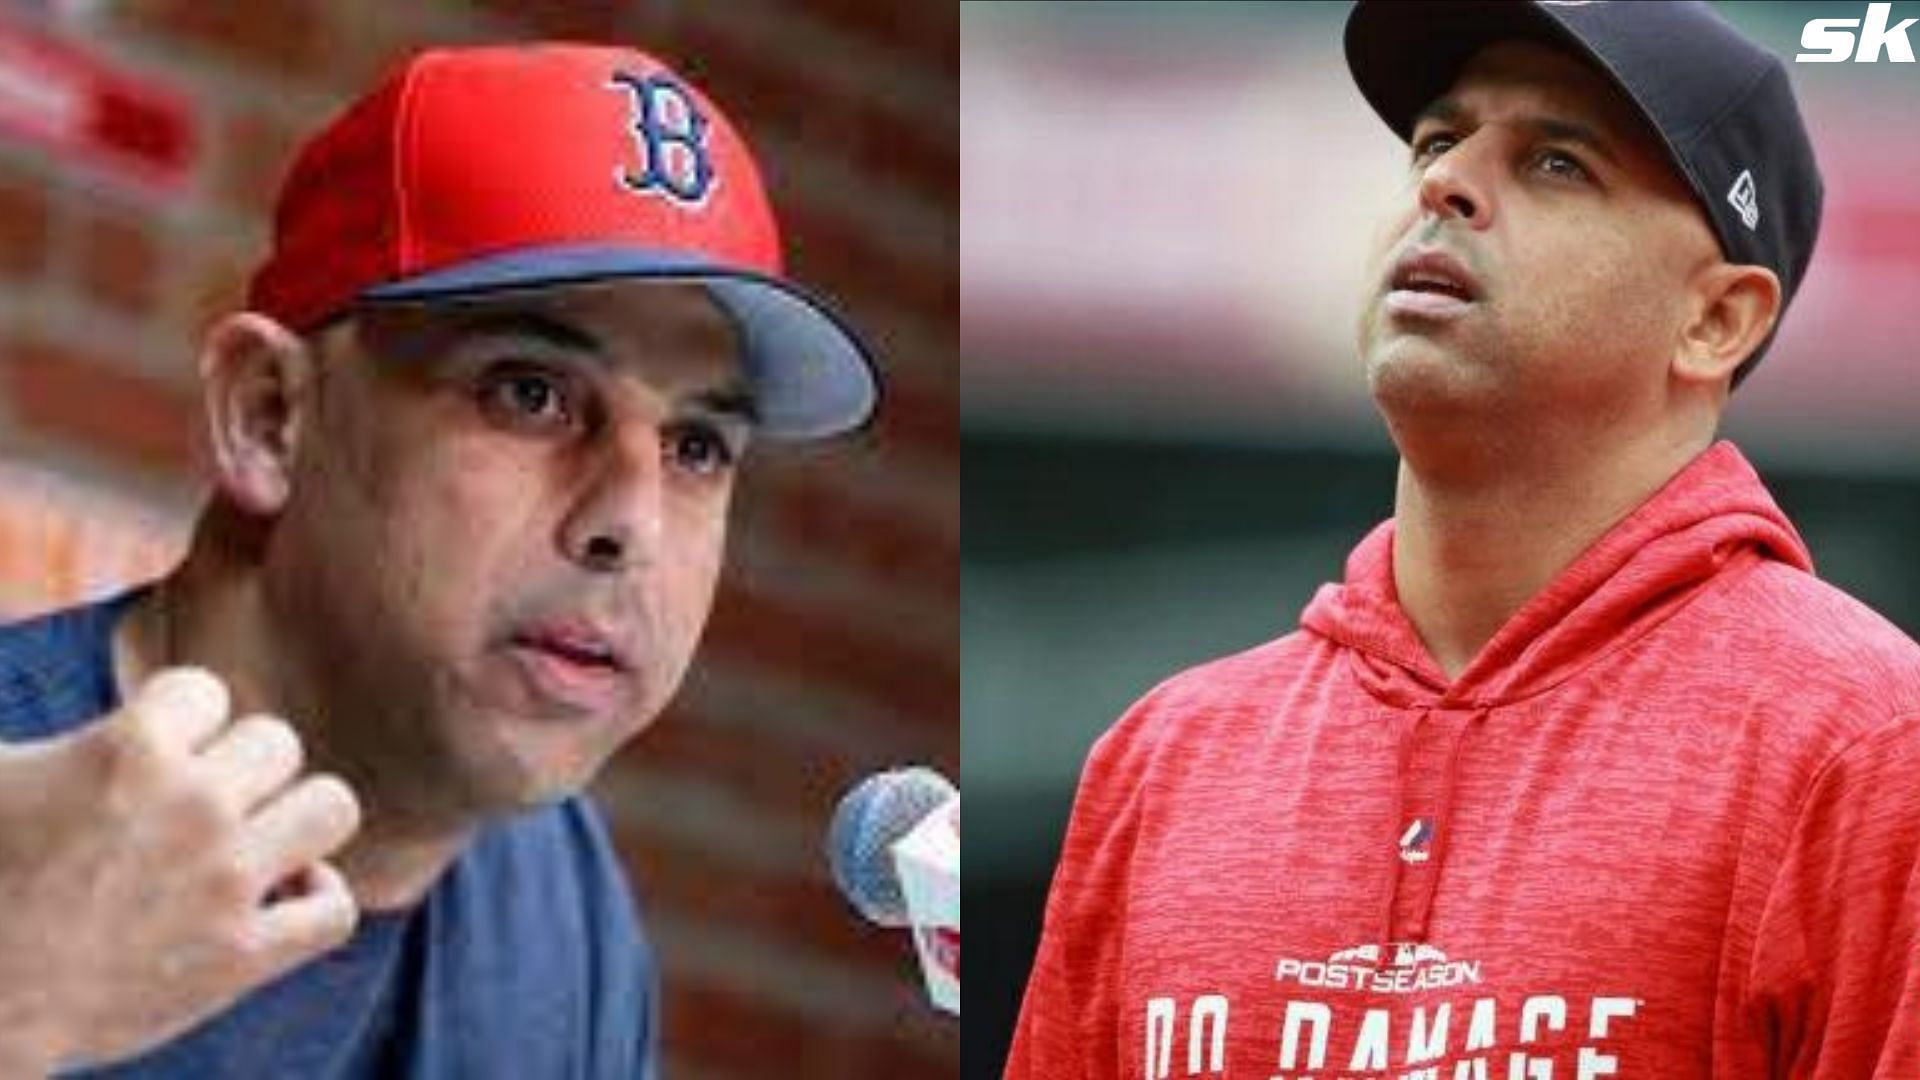 Alex cora: Alex Cora once inadvertently admitted Houston Astros